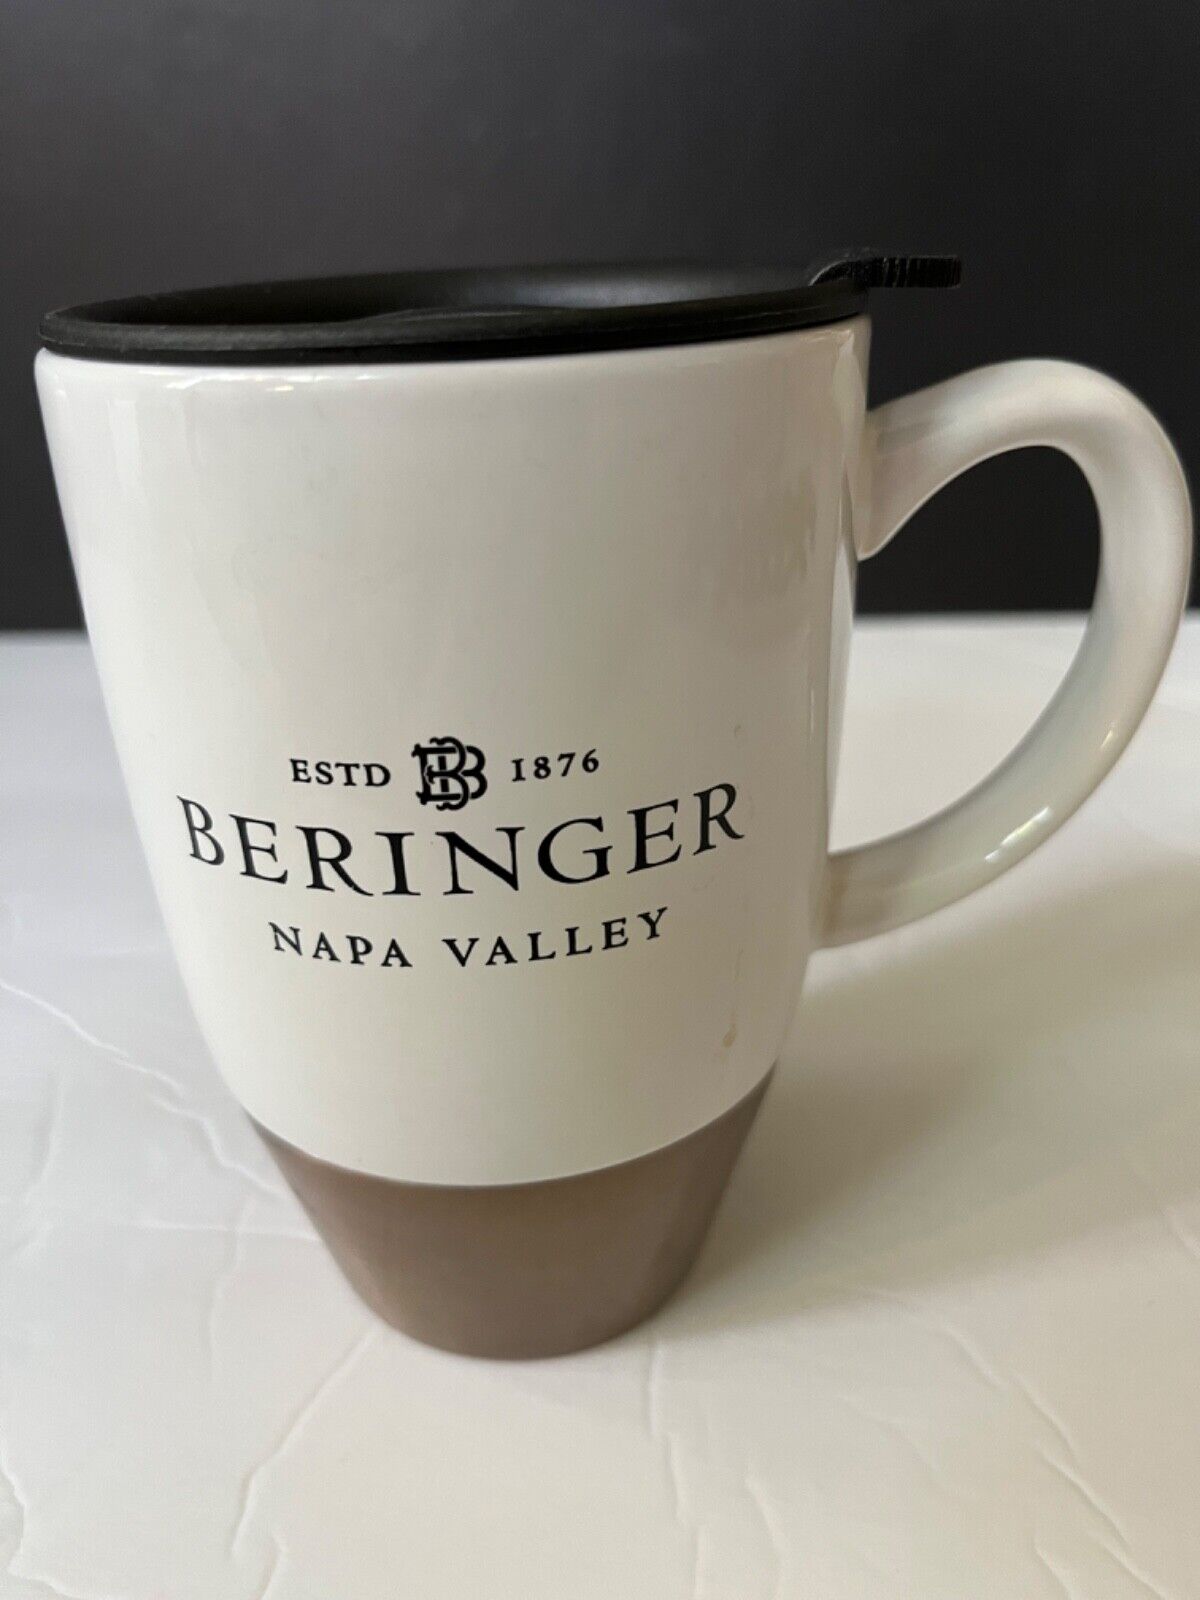 NEW Beringer Napa Valley Coffee Tea Mug Cup with Lid - Holds 14oz VERY NICE 